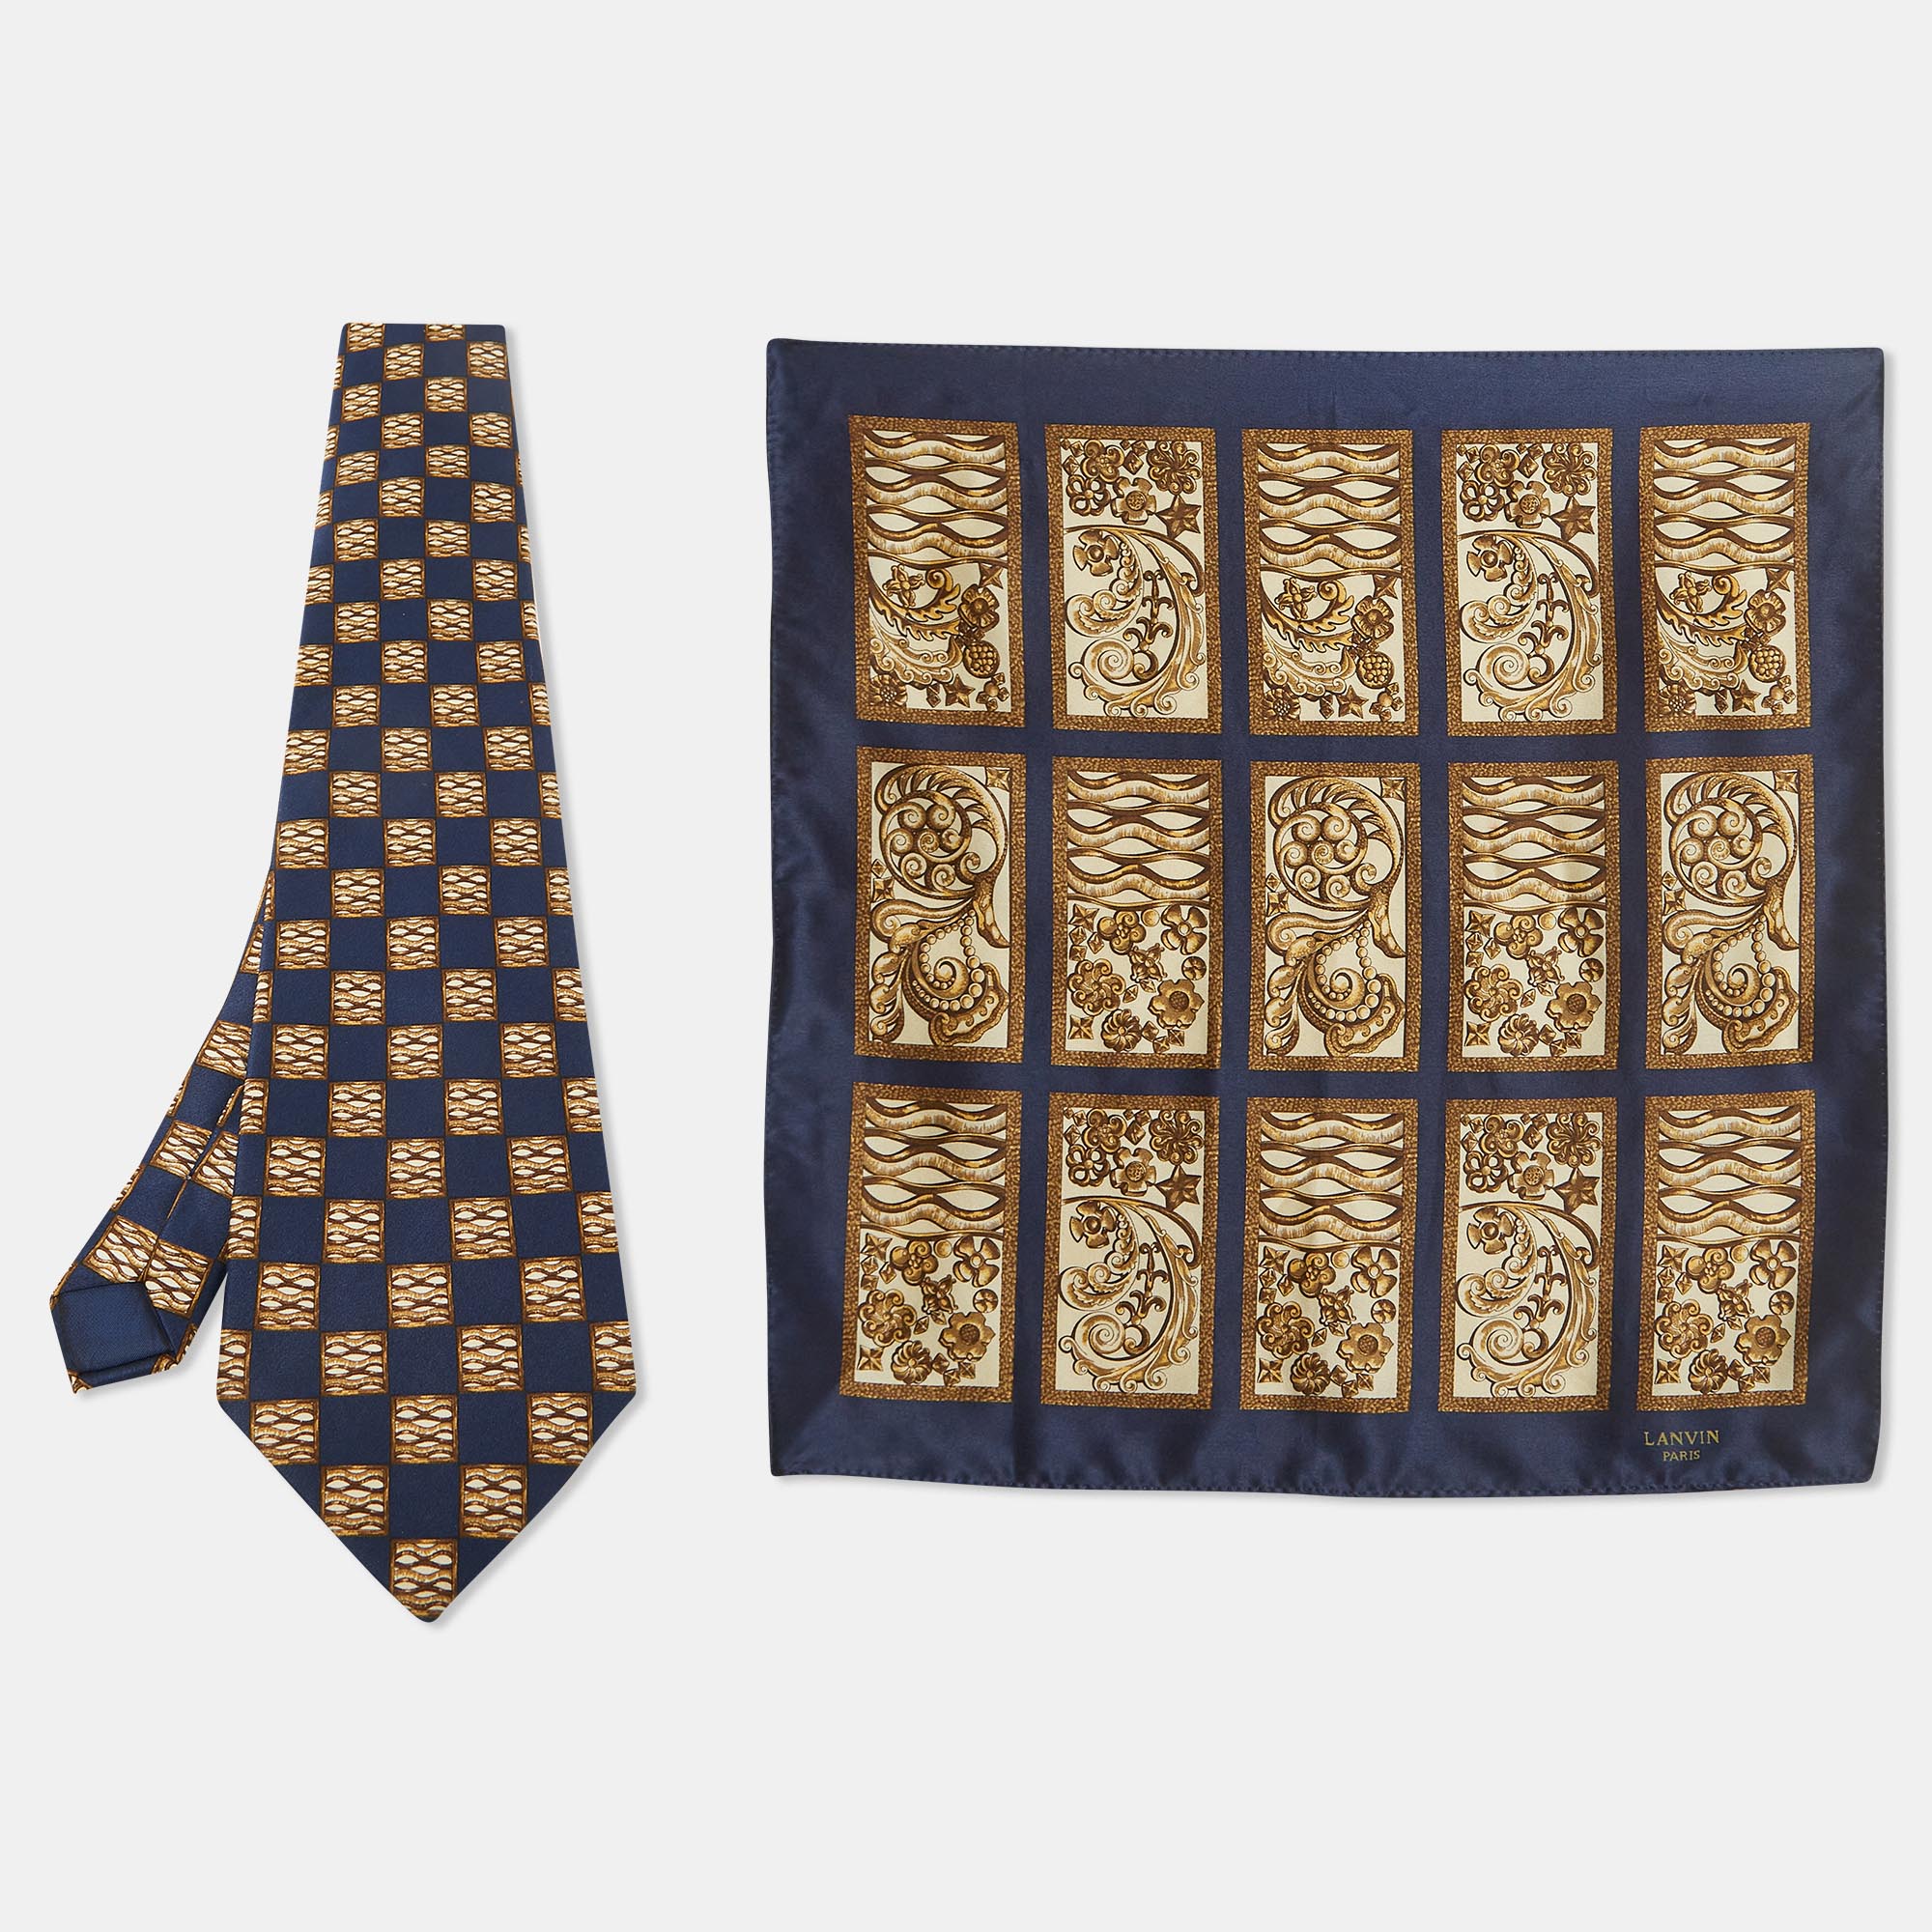 

Lanvin Blue Printed Satin Silk Pocket Square and Traditional Tie